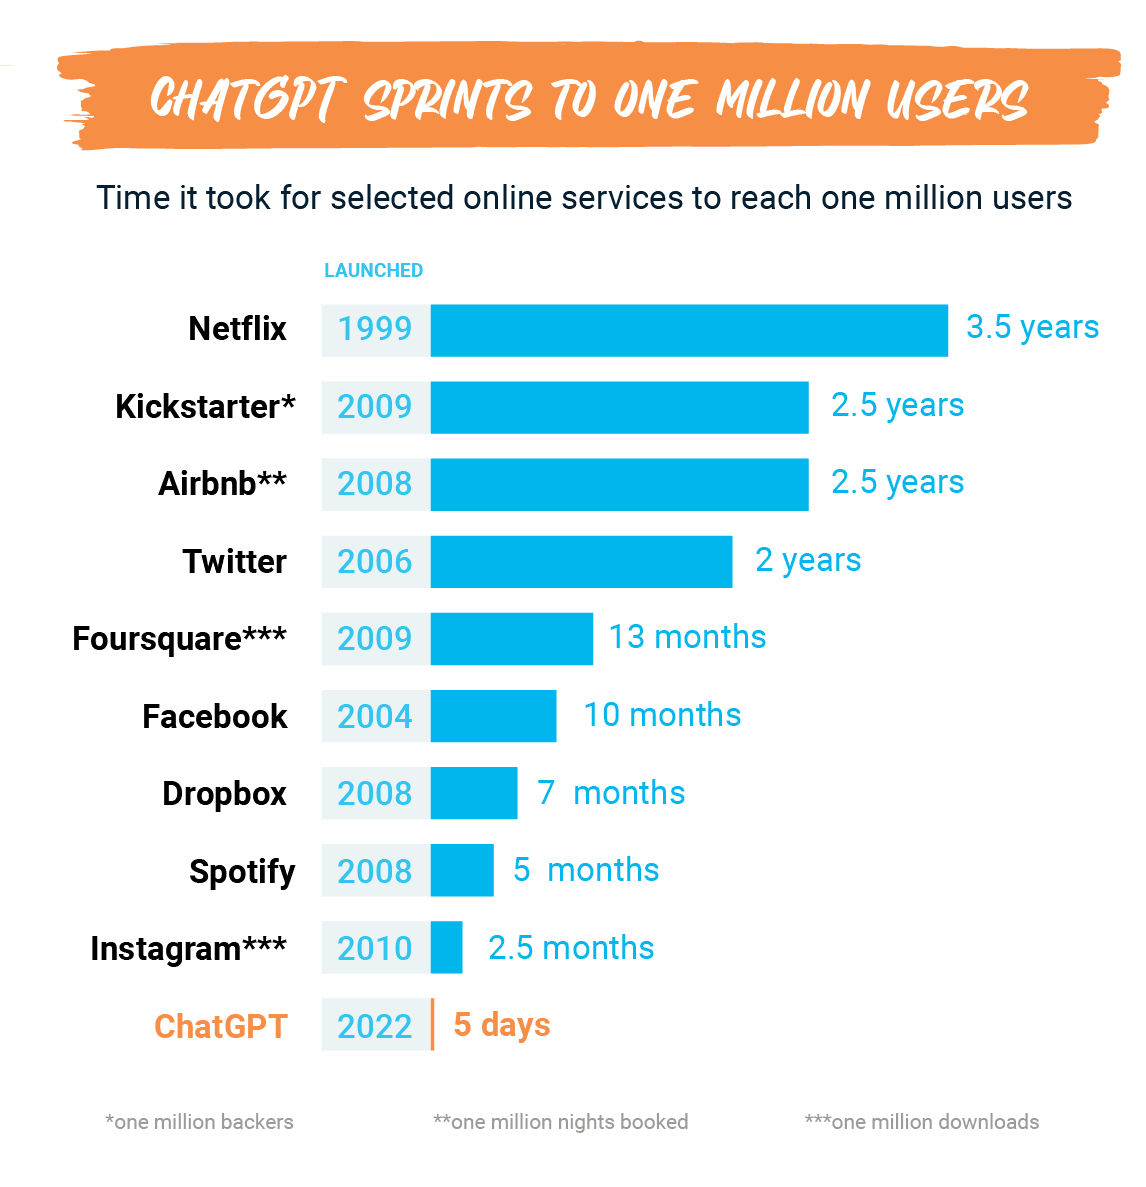 ChatGPT sprints to one million users